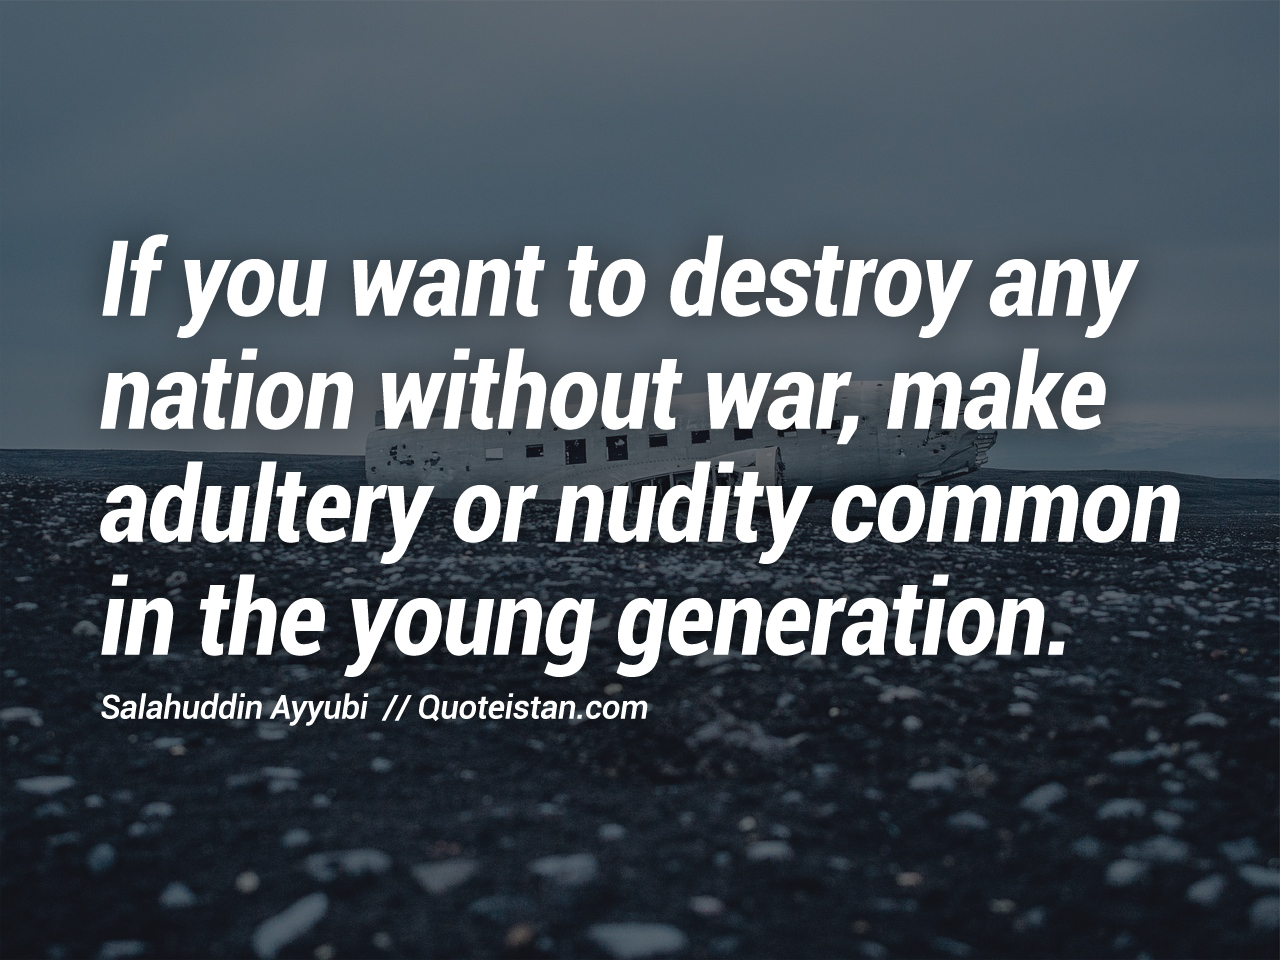 If you want to destroy any nation without war, make adultery or nudity common in the young generation.